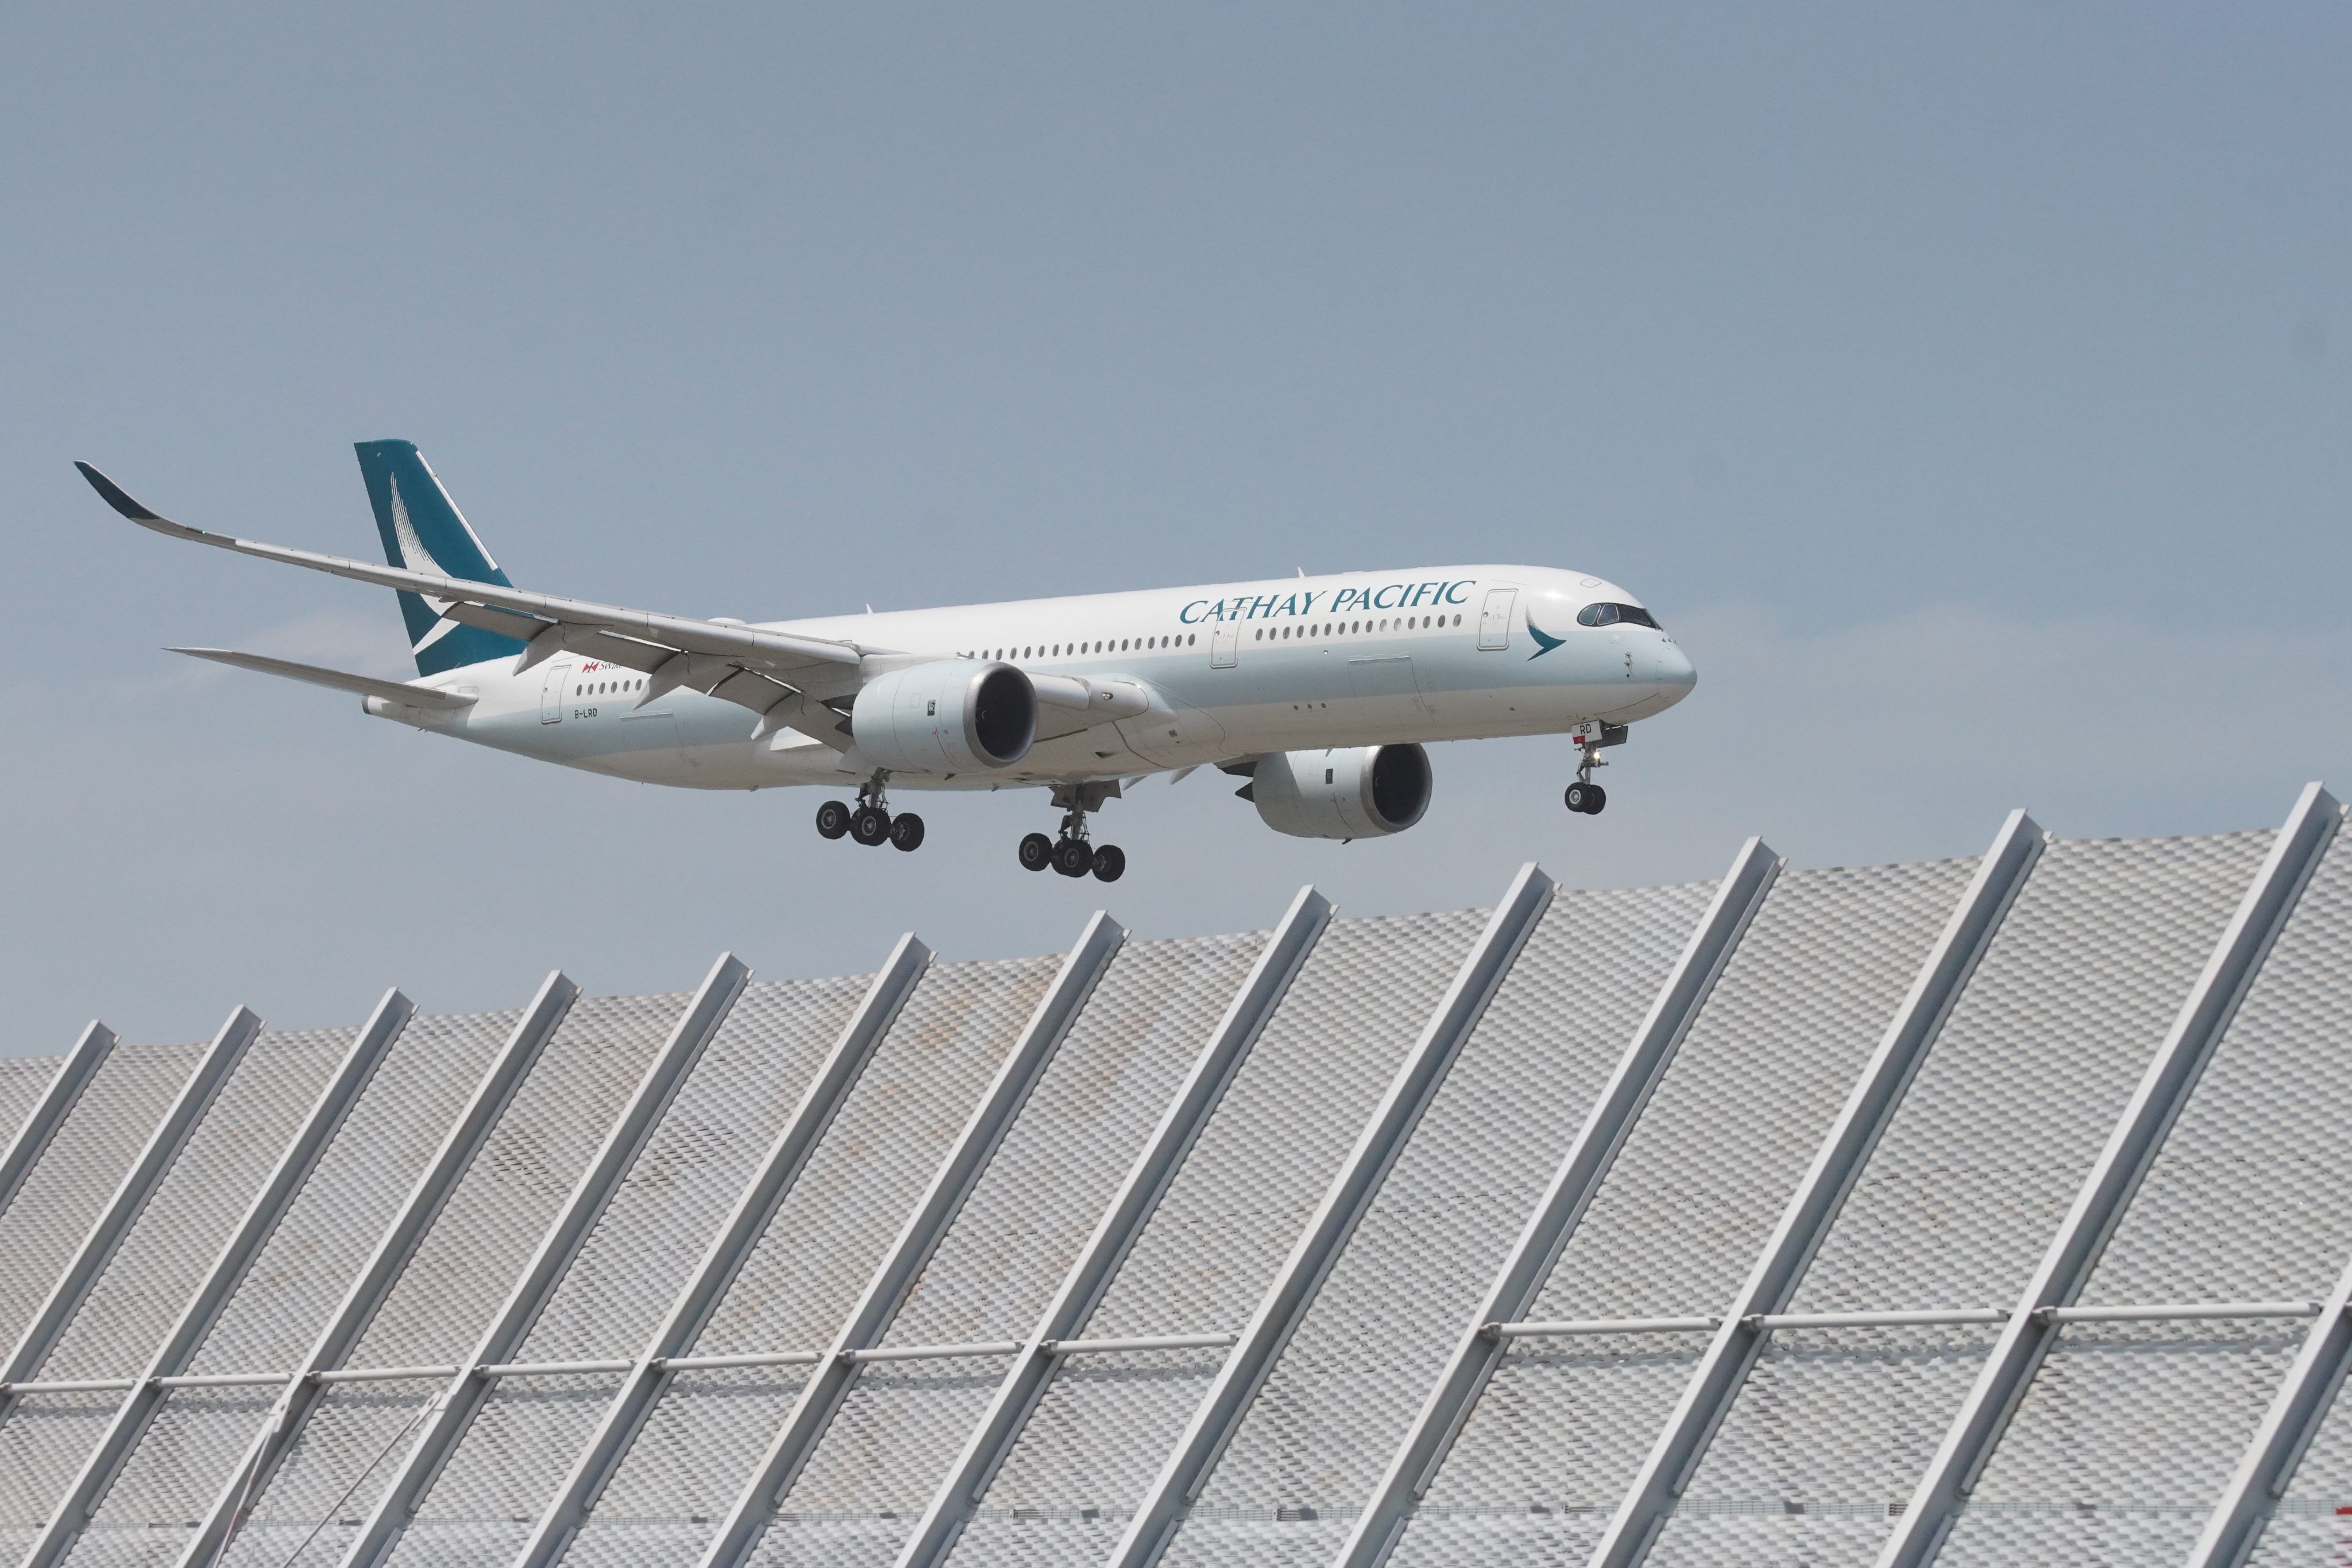 Cathay Pacific’s website was congested after a number of hopefuls tried to win free airline tickets. Photo: Winson Wong